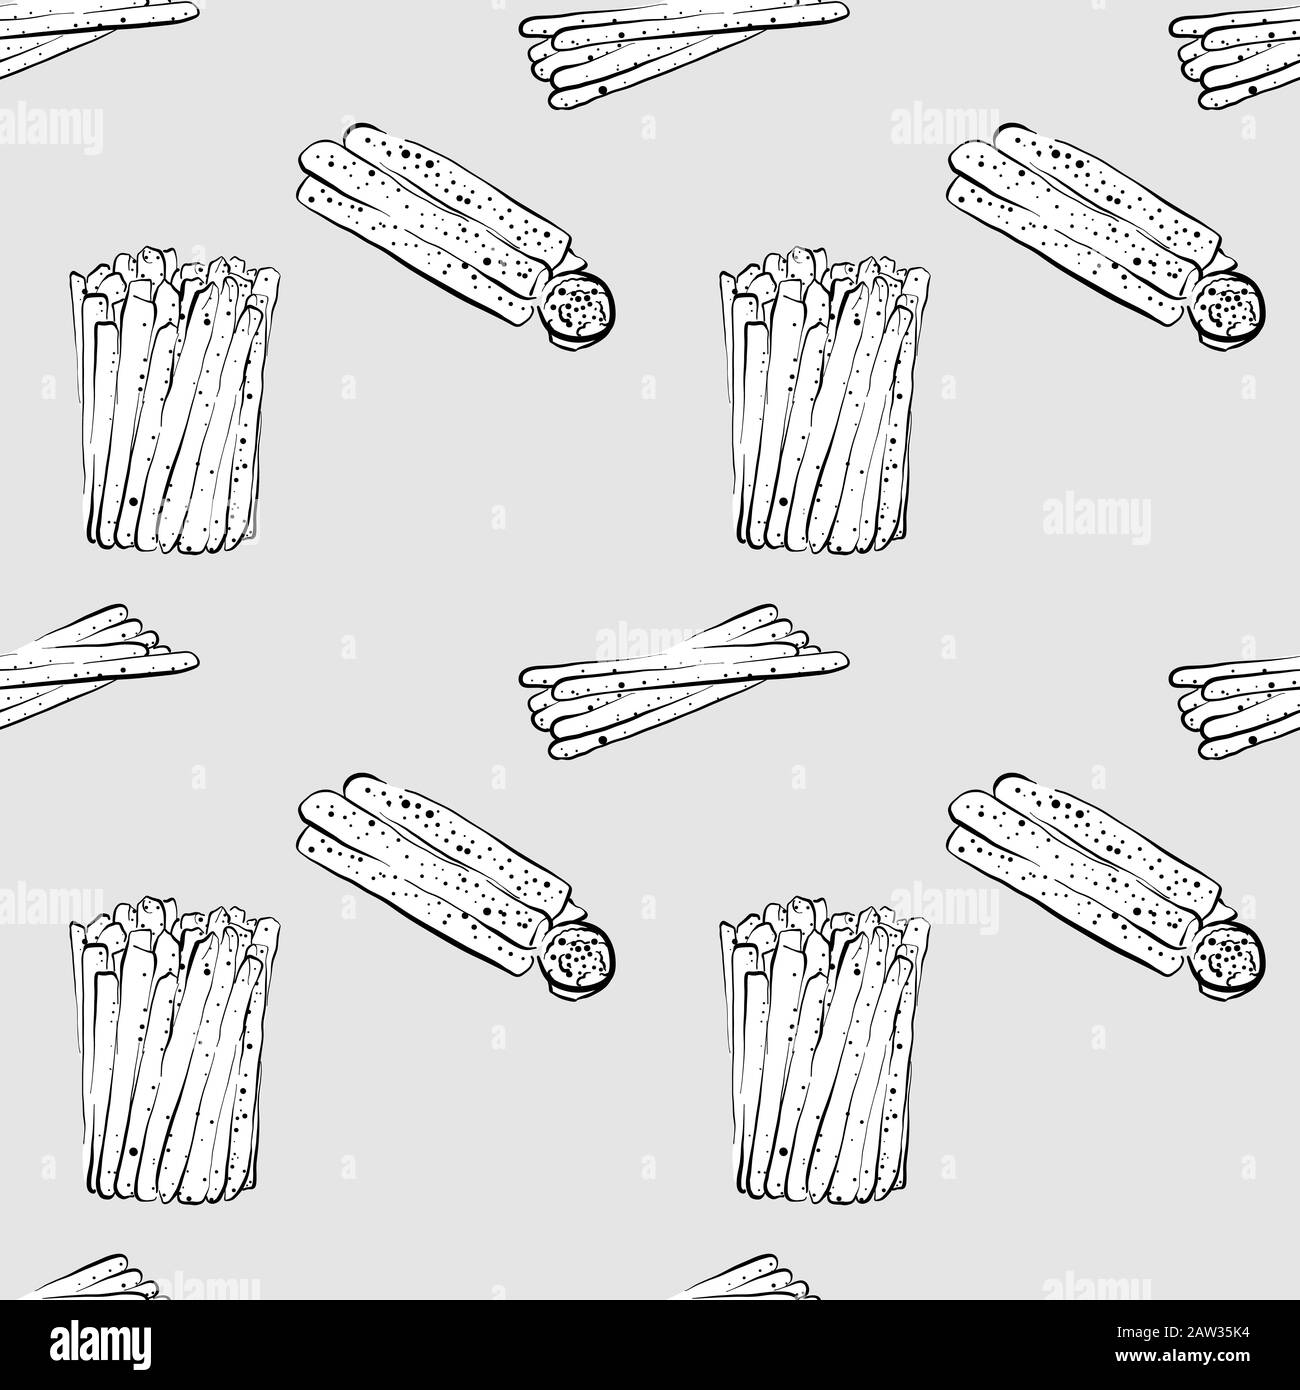 Breadstick seamless pattern greyscale drawing. Useable for wallpaper or any sized decoration. Handdrawn Vector Illustration Stock Vector